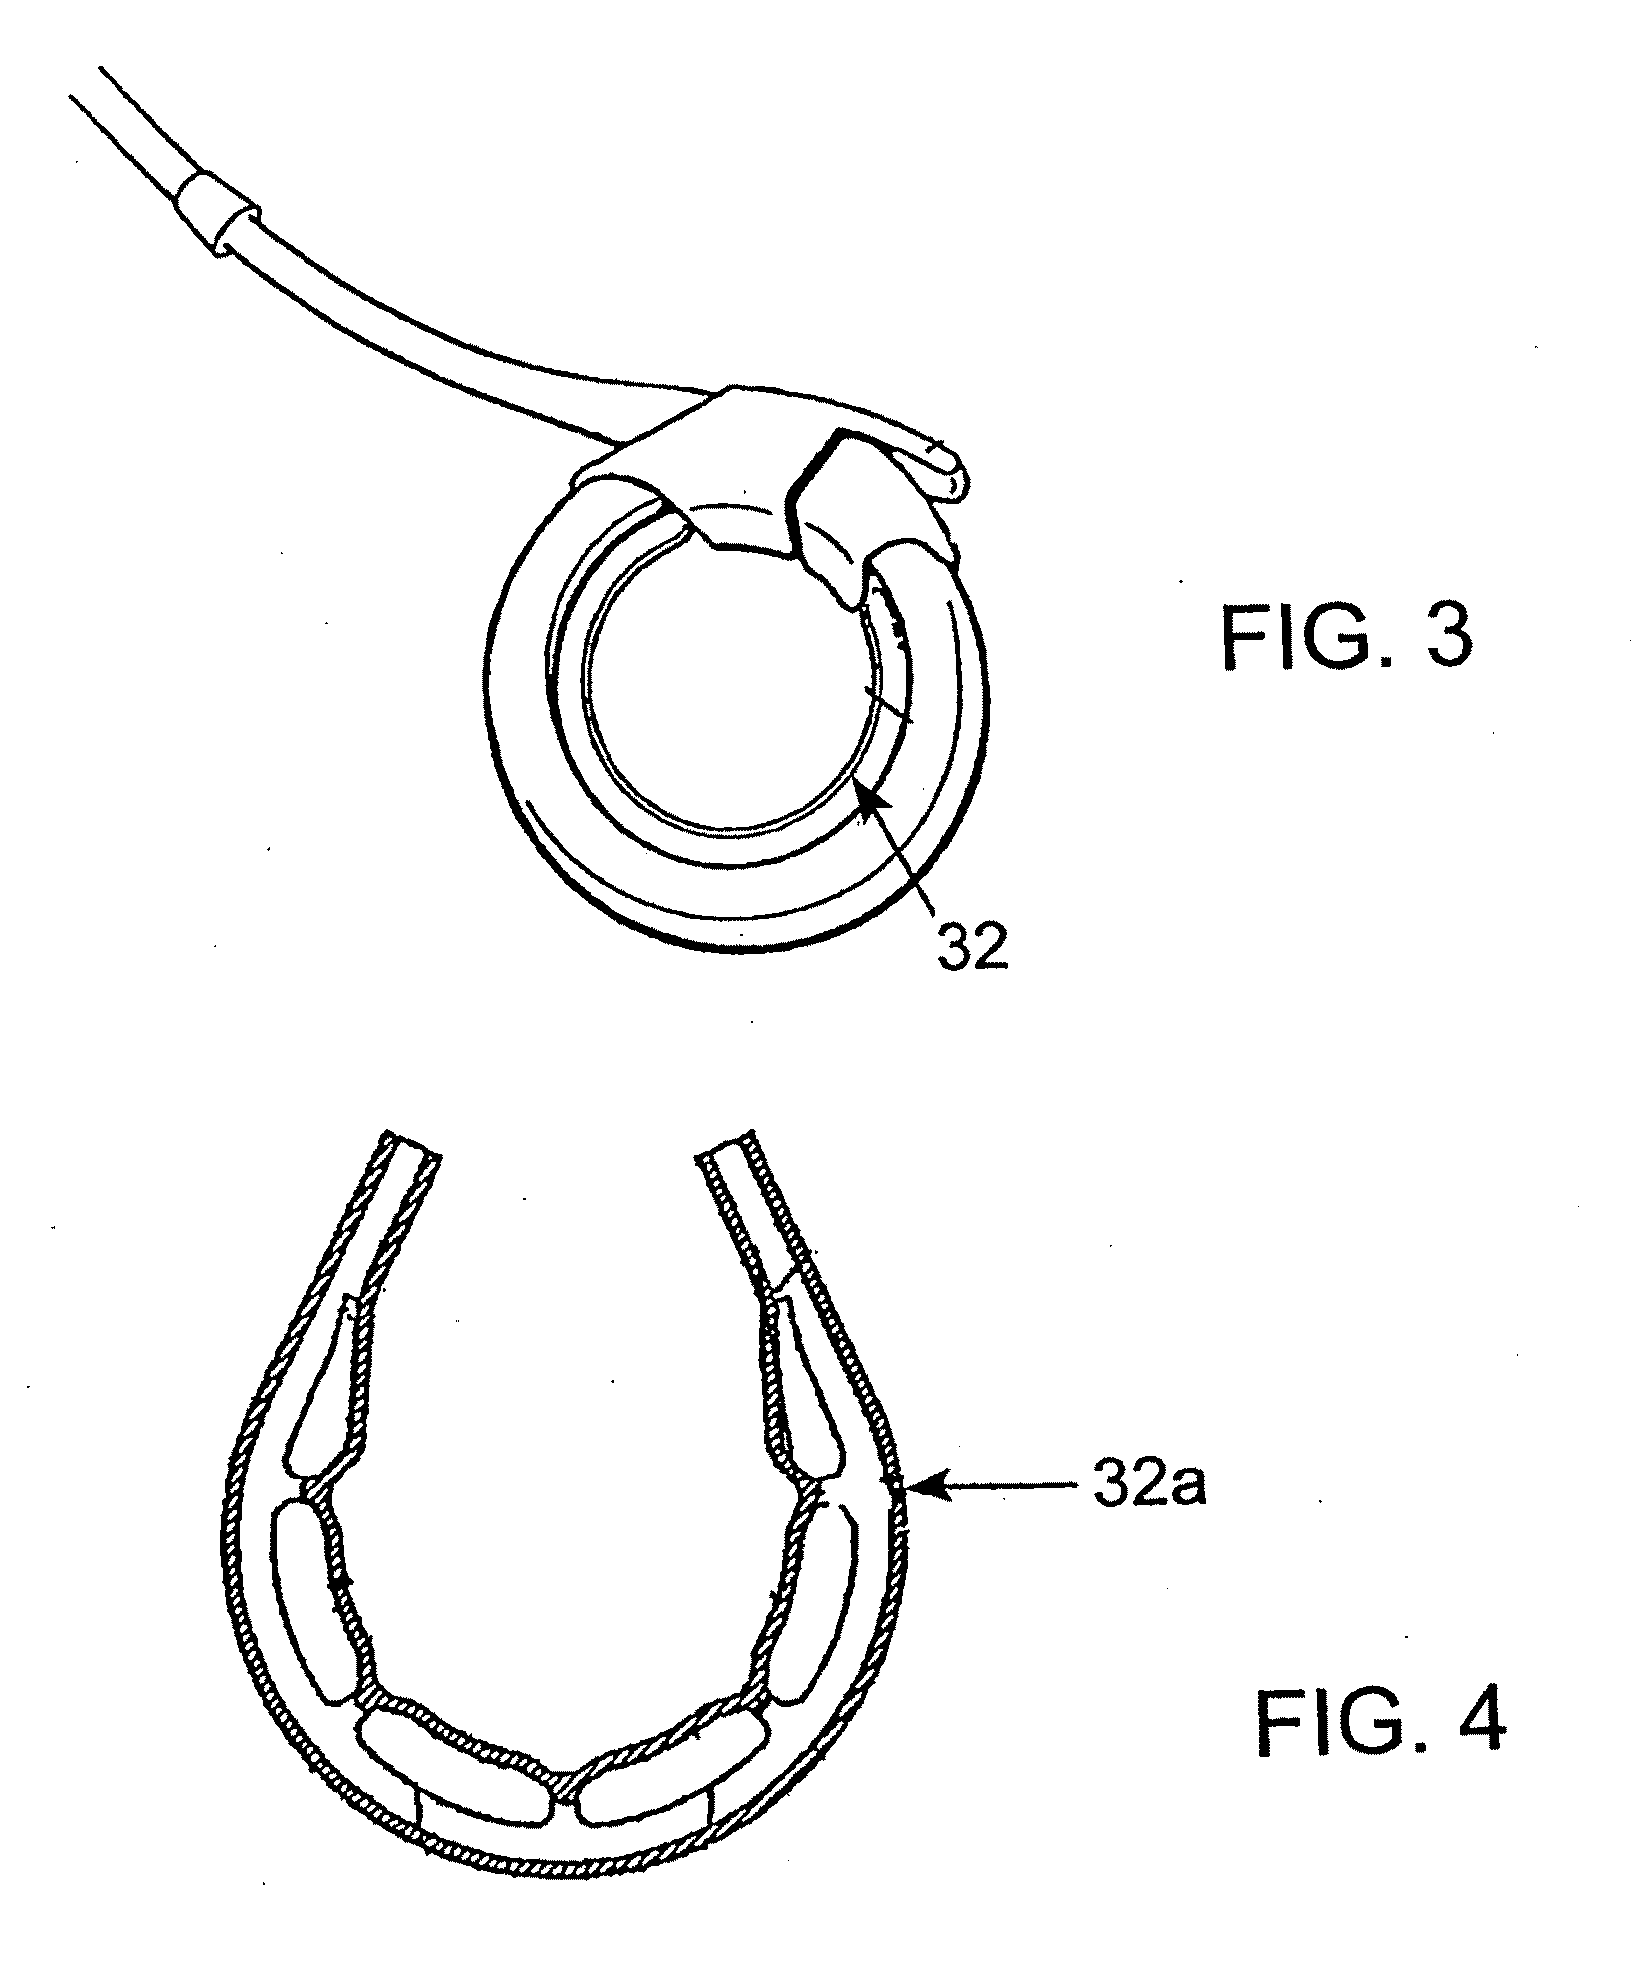 Releasably-securable one-piece adjustable gastric band